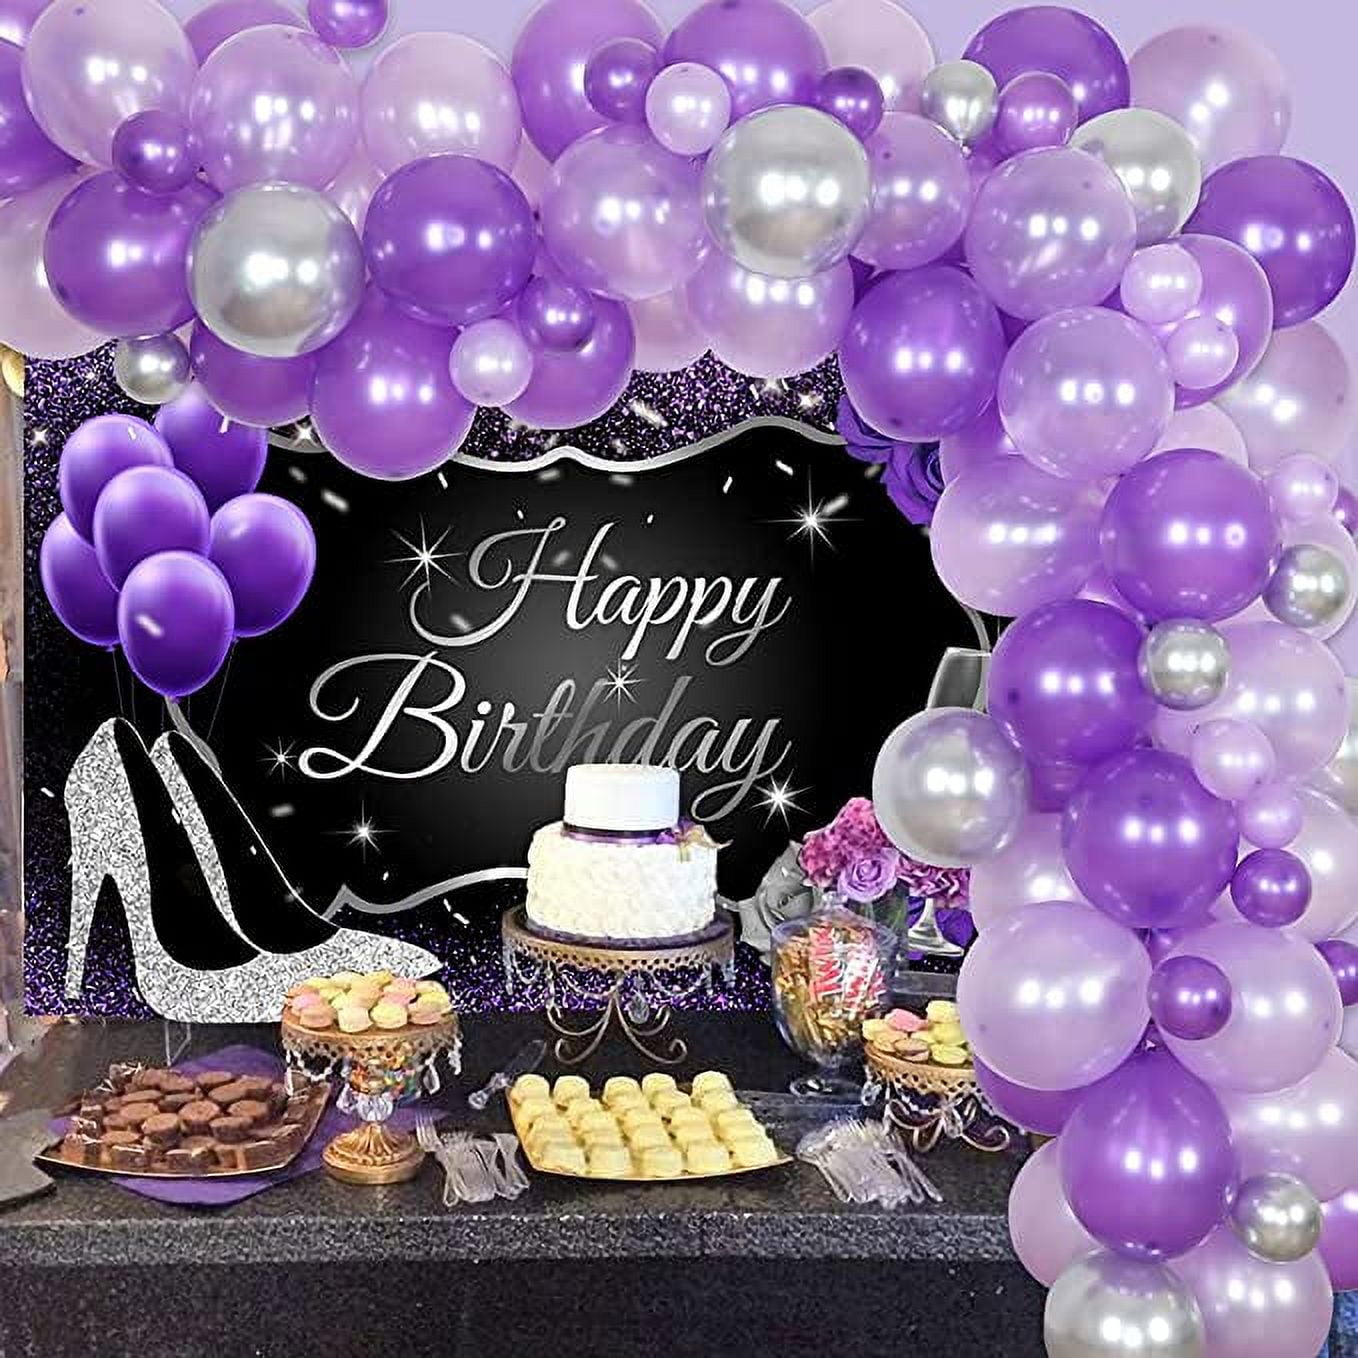 Purple and Silver Party Decorations for Women Adults Happy Birthday  Backdrop Balloon Garland Kit, Violet Lavender 30th 40th 50th 60th Birthday  Decorations 73Pcs 